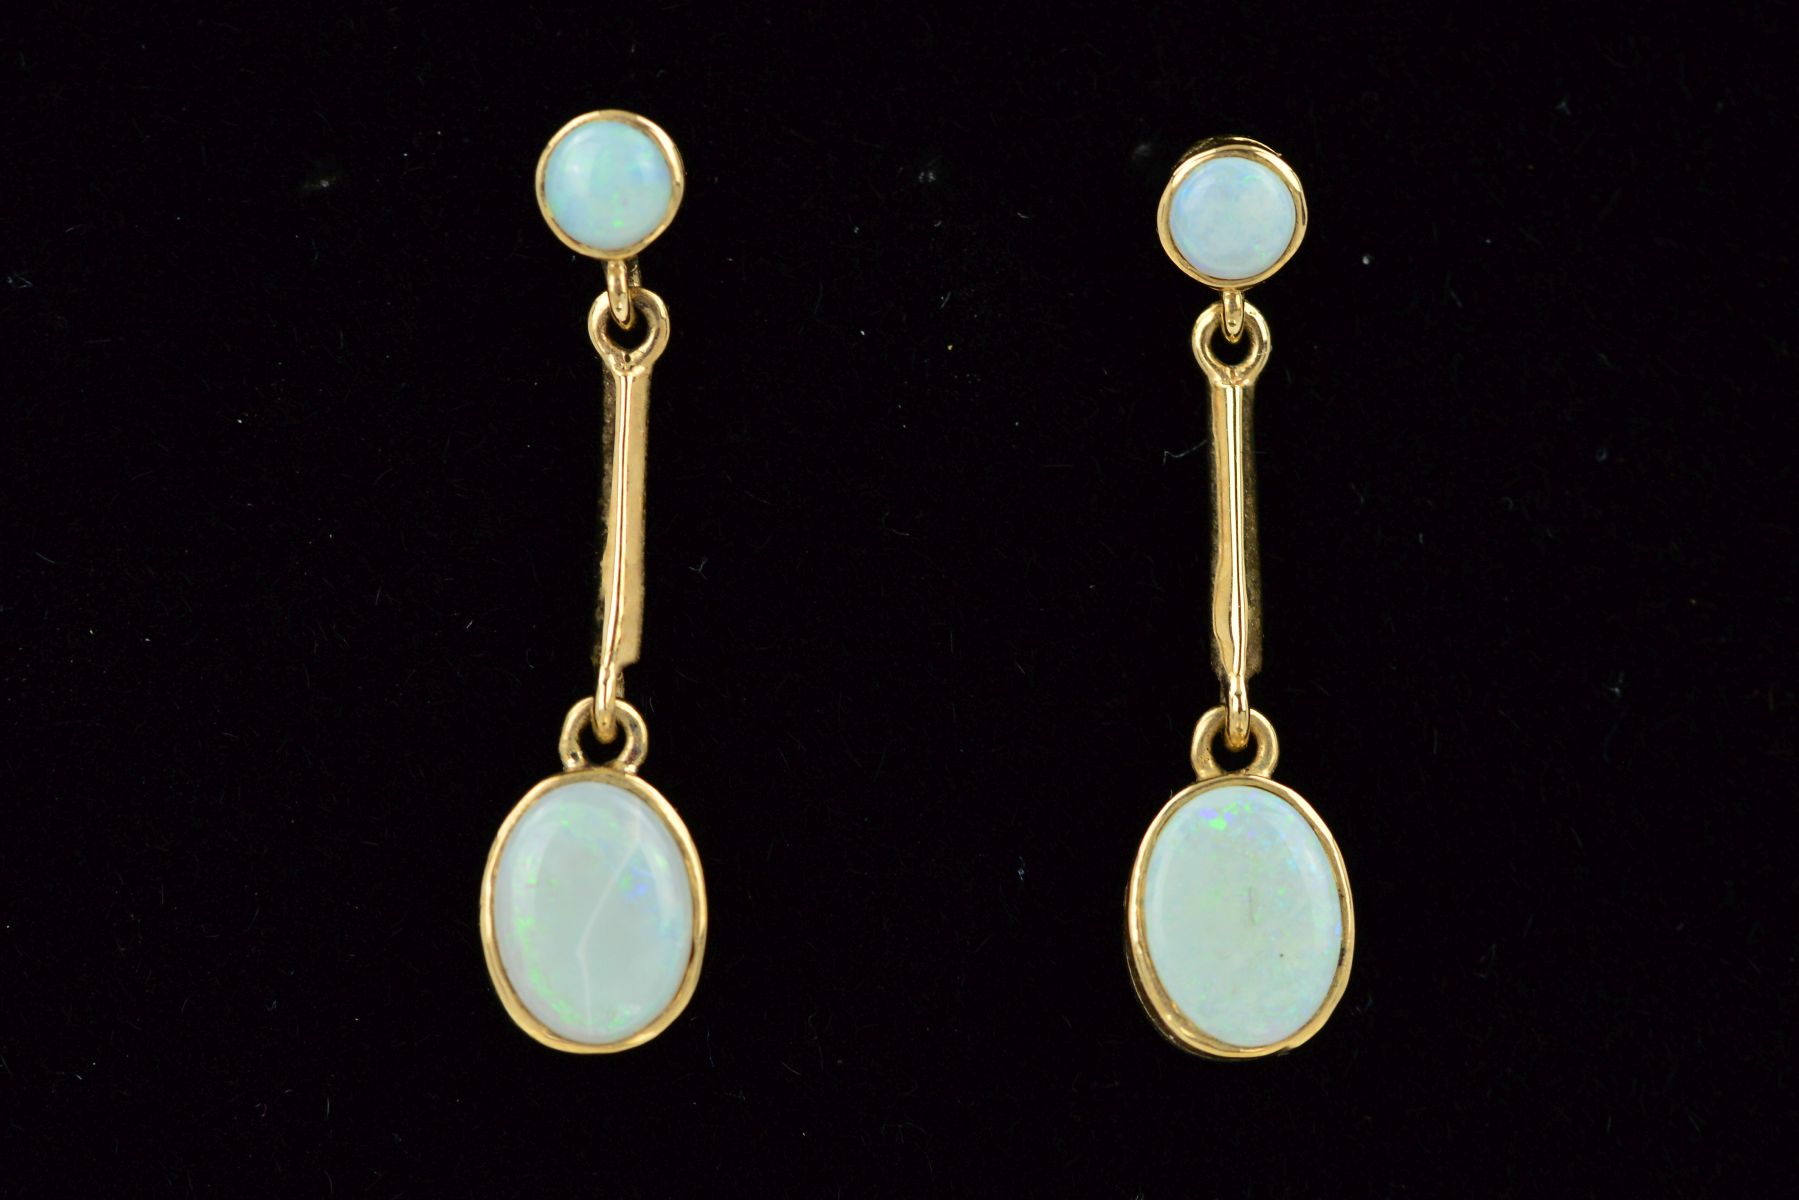 A PAIR OF 9CT GOLD OPAL DROP EARRINGS, each designed as a circular opal within a collet setting